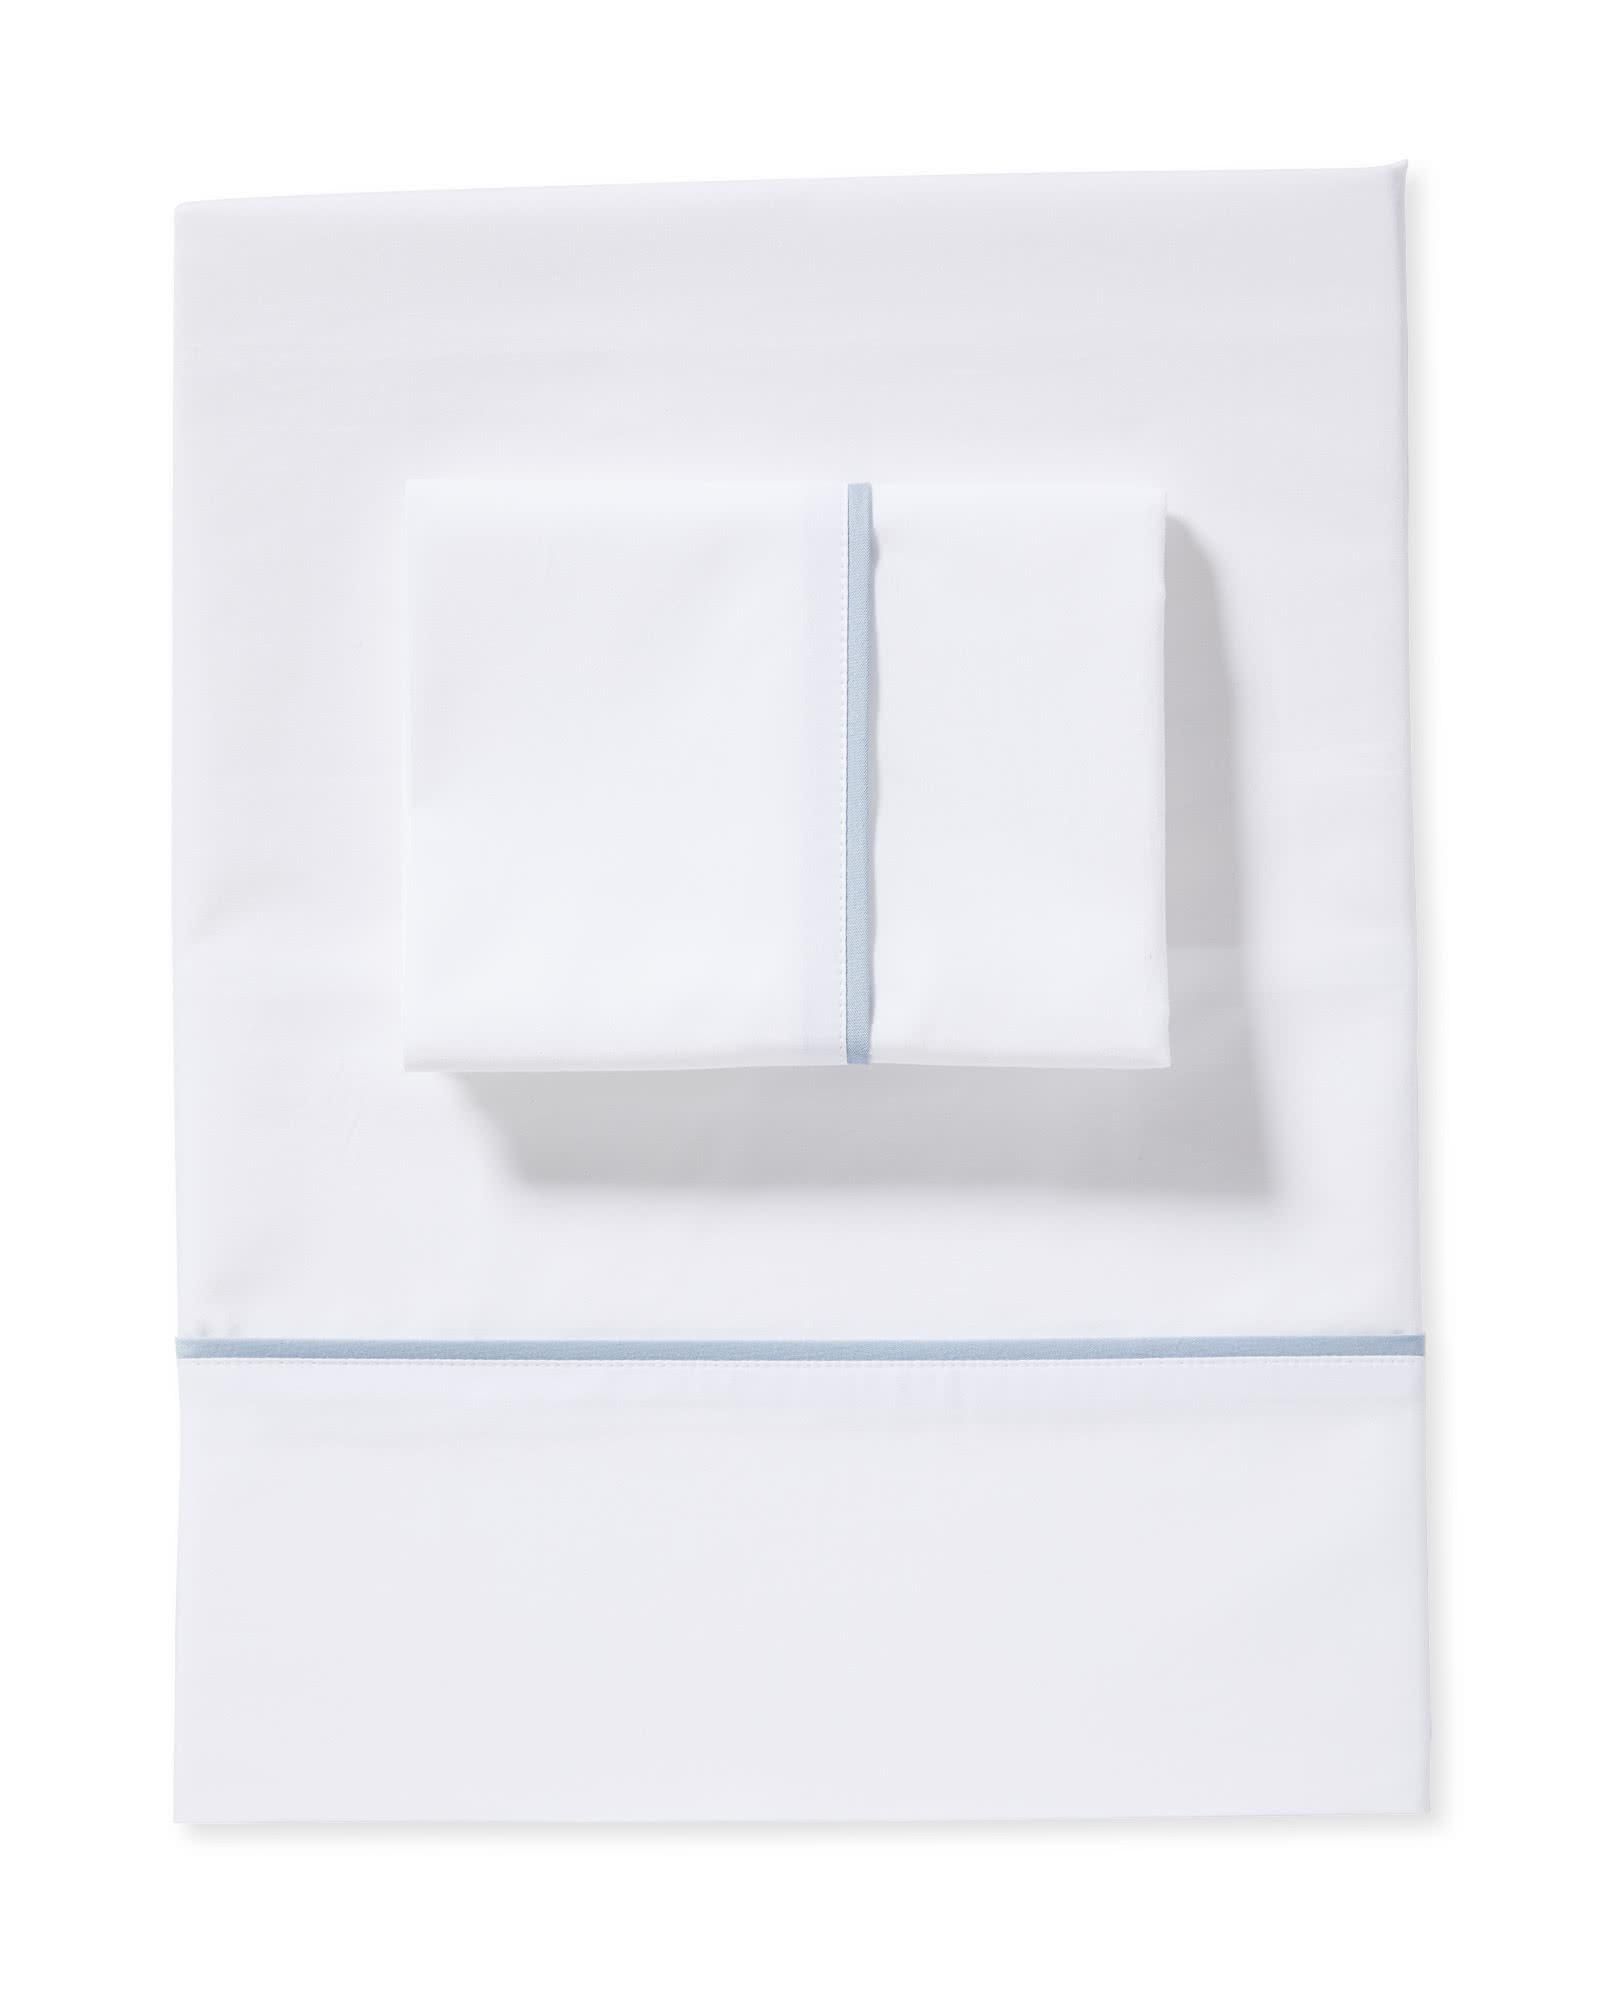 Beach Club Percale Sheet Set | Serena and Lily